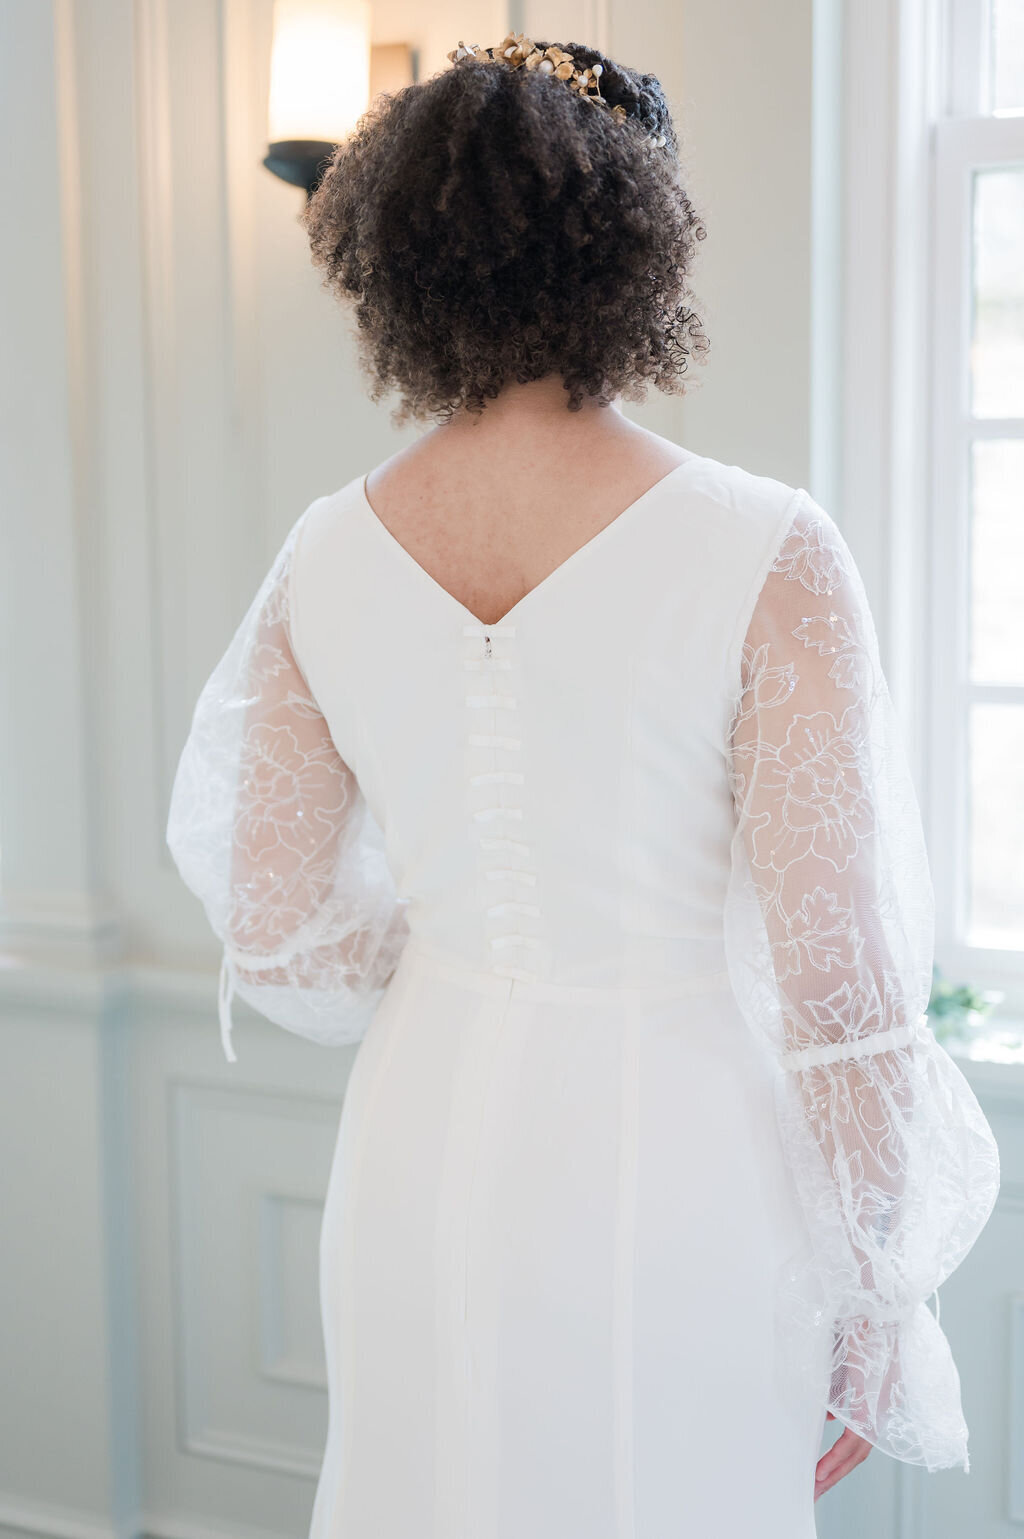 Harlow is a more modest wedding dress style with its high v-back, which is accented with a column of bows down to the waist.